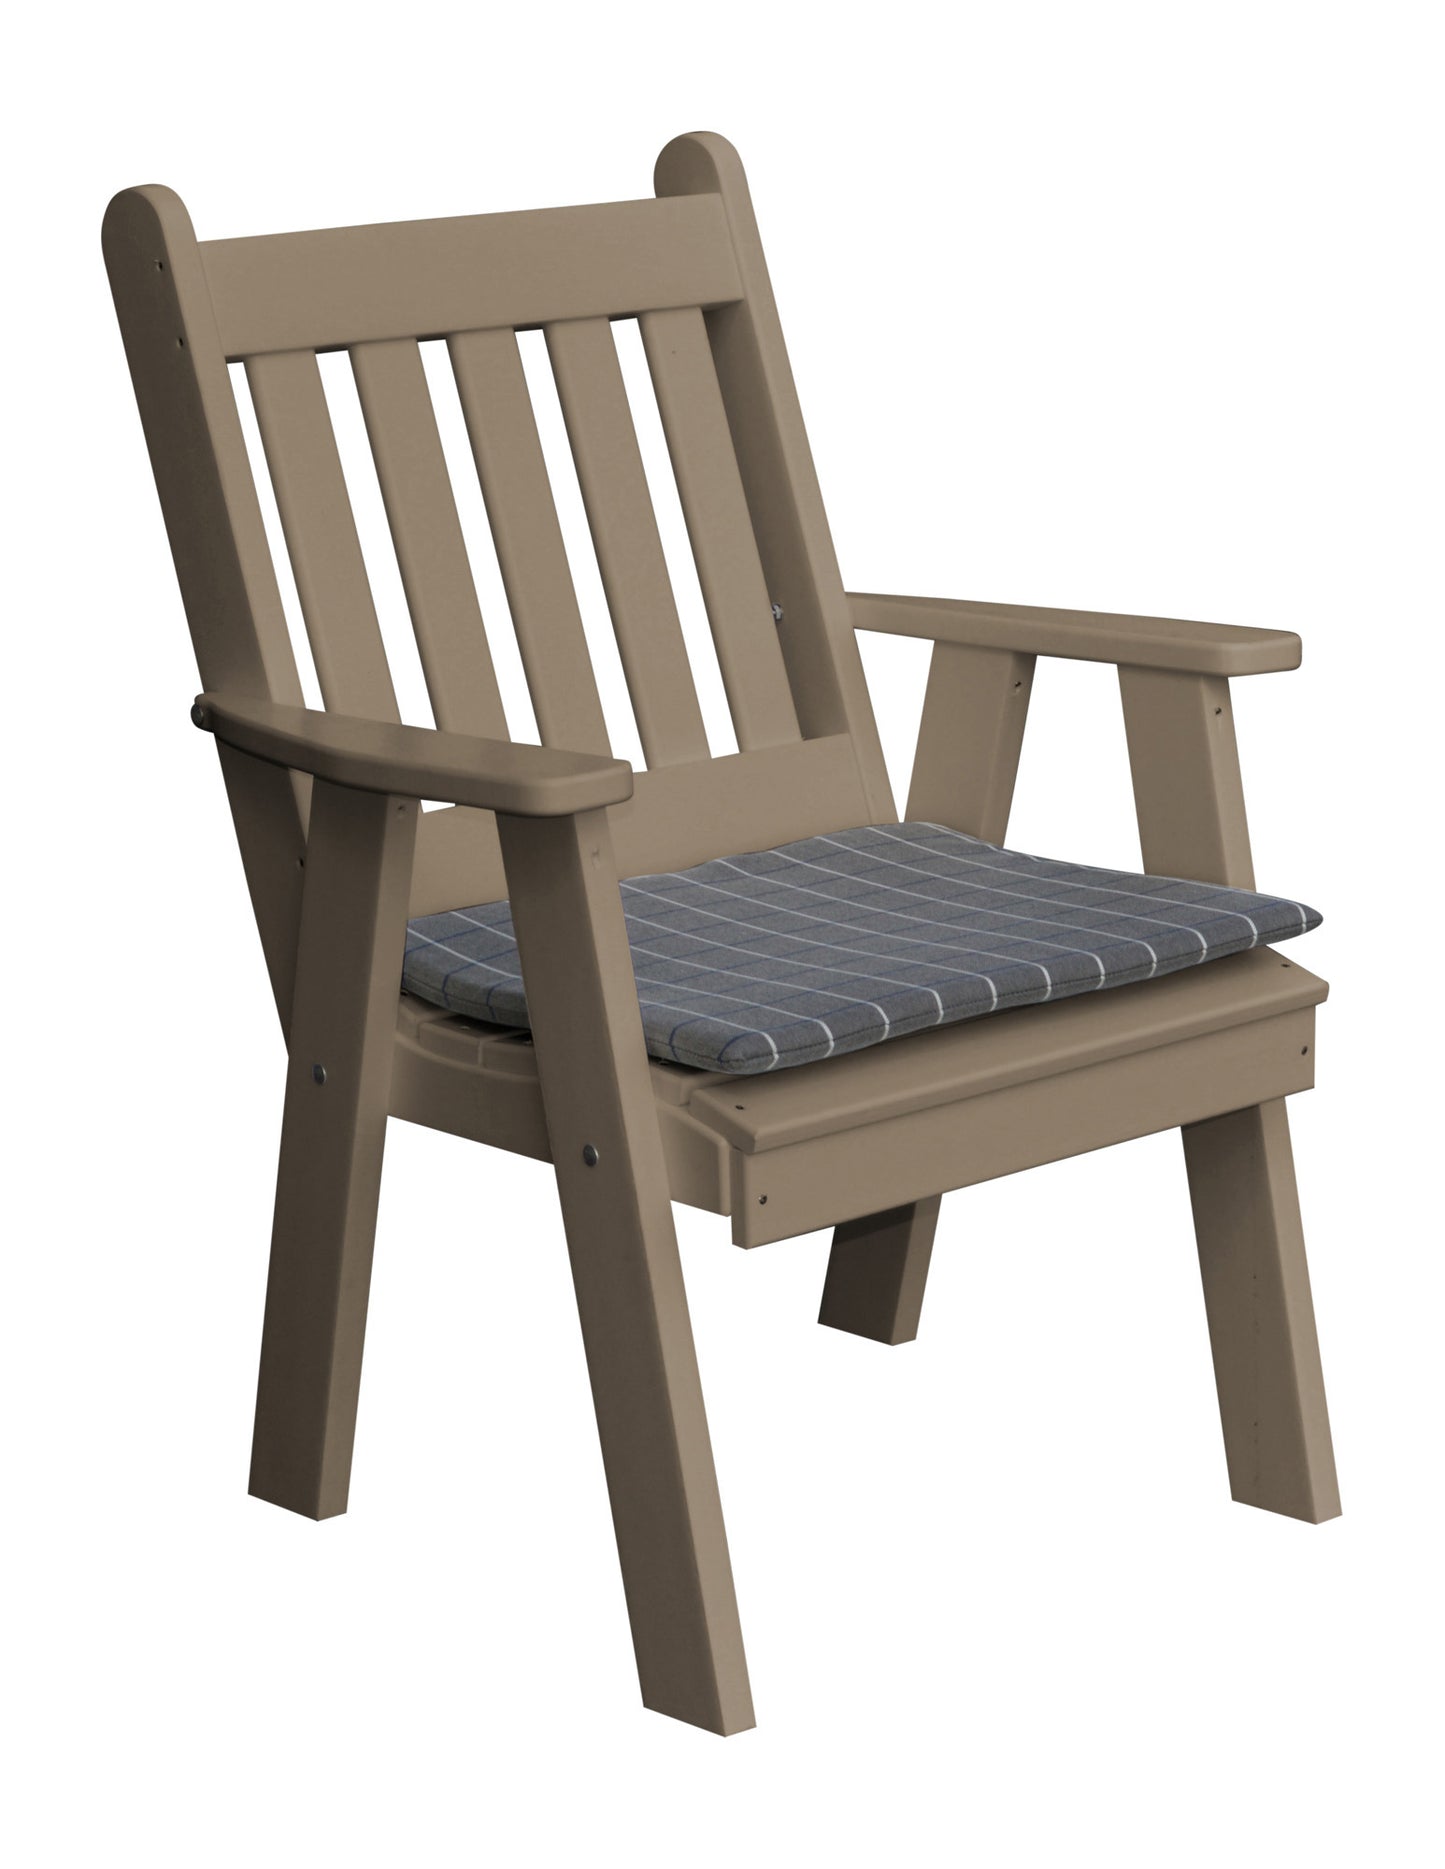 A&L Furniture Company Recycled Plastic Traditional English Deck Chair - LEAD TIME TO SHIP 10 BUSINESS DAYS